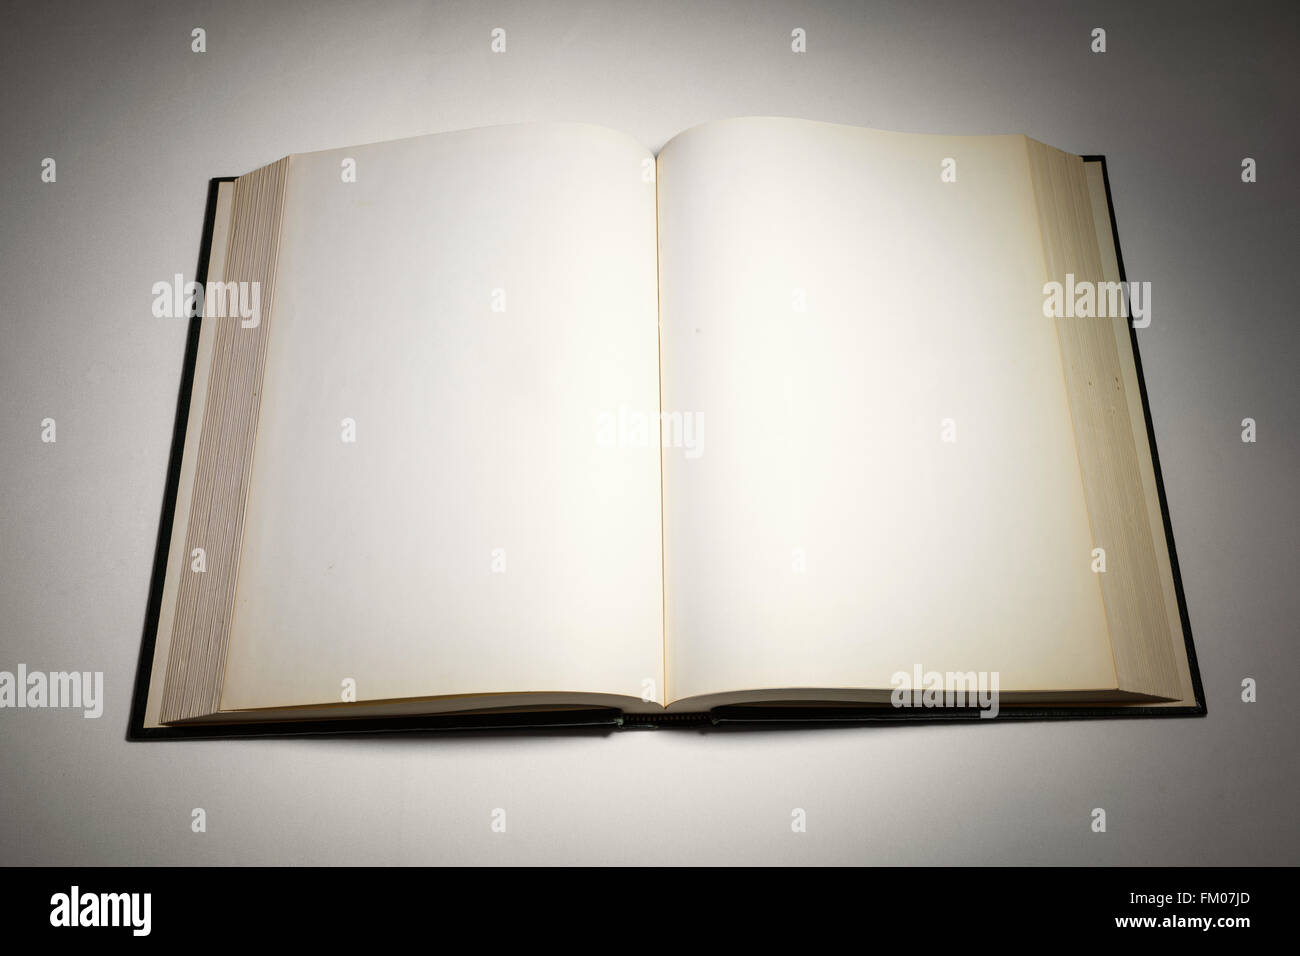 Old Opened Book Blank Pages Wooden Background Stock Photo by ©YAYImages  261914272